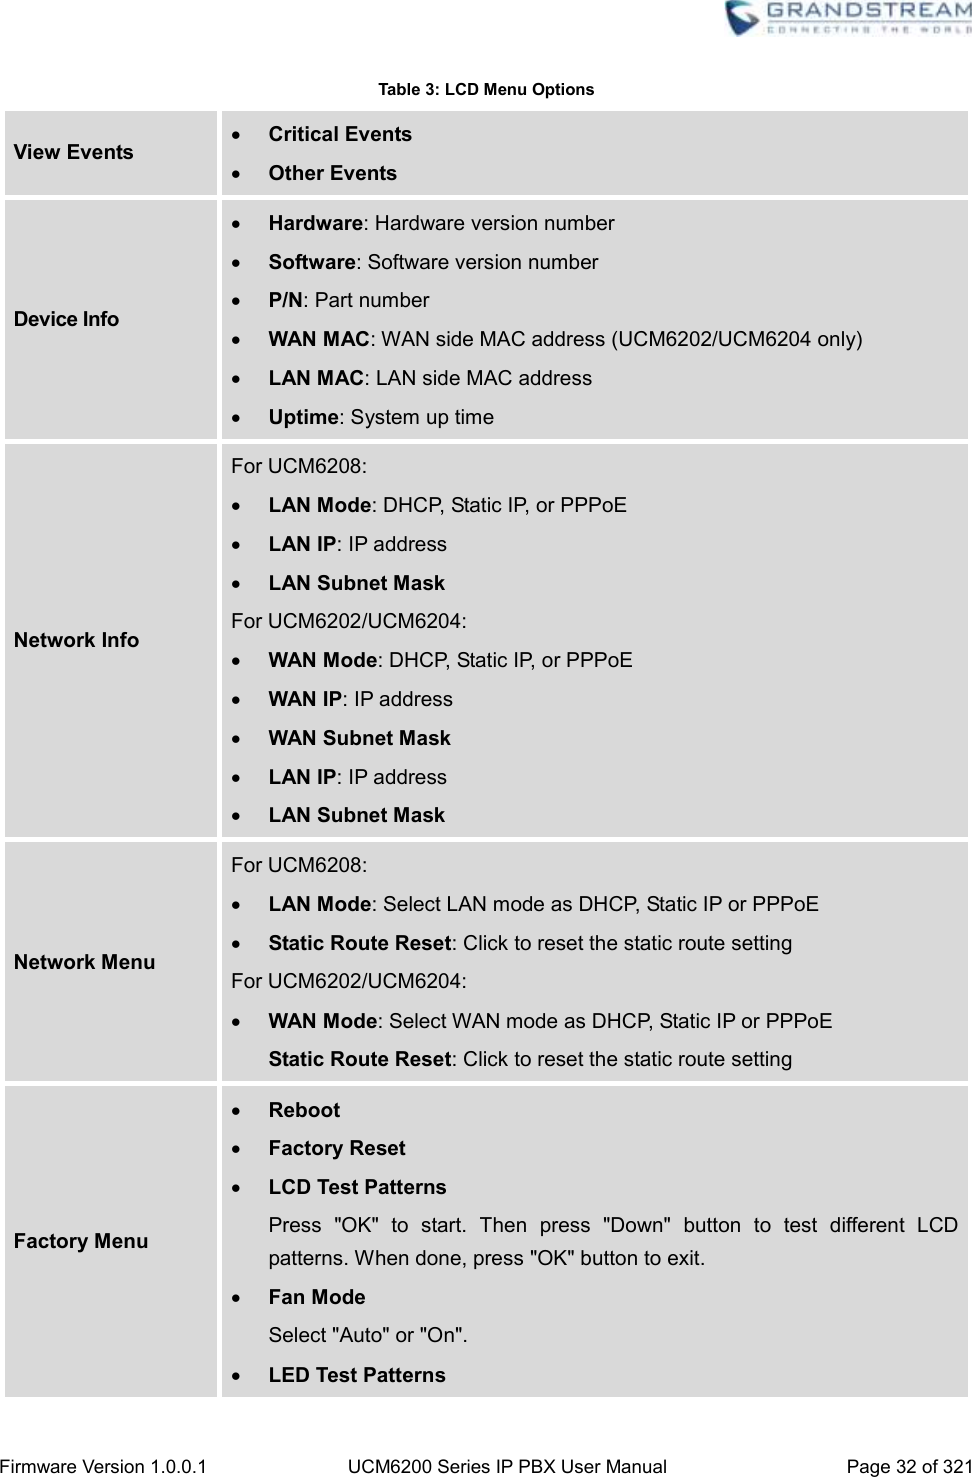  Firmware Version 1.0.0.1 UCM6200 Series IP PBX User Manual Page 32 of 321    Table 3: LCD Menu Options View Events  Critical Events  Other Events Device Info  Hardware: Hardware version number  Software: Software version number  P/N: Part number  WAN MAC: WAN side MAC address (UCM6202/UCM6204 only)  LAN MAC: LAN side MAC address  Uptime: System up time Network Info For UCM6208:  LAN Mode: DHCP, Static IP, or PPPoE  LAN IP: IP address  LAN Subnet Mask For UCM6202/UCM6204:  WAN Mode: DHCP, Static IP, or PPPoE  WAN IP: IP address  WAN Subnet Mask  LAN IP: IP address  LAN Subnet Mask Network Menu For UCM6208:  LAN Mode: Select LAN mode as DHCP, Static IP or PPPoE  Static Route Reset: Click to reset the static route setting For UCM6202/UCM6204:  WAN Mode: Select WAN mode as DHCP, Static IP or PPPoE Static Route Reset: Click to reset the static route setting Factory Menu  Reboot  Factory Reset  LCD Test Patterns Press  &quot;OK&quot;  to  start.  Then  press  &quot;Down&quot;  button  to  test  different  LCD patterns. When done, press &quot;OK&quot; button to exit.  Fan Mode Select &quot;Auto&quot; or &quot;On&quot;.  LED Test Patterns 